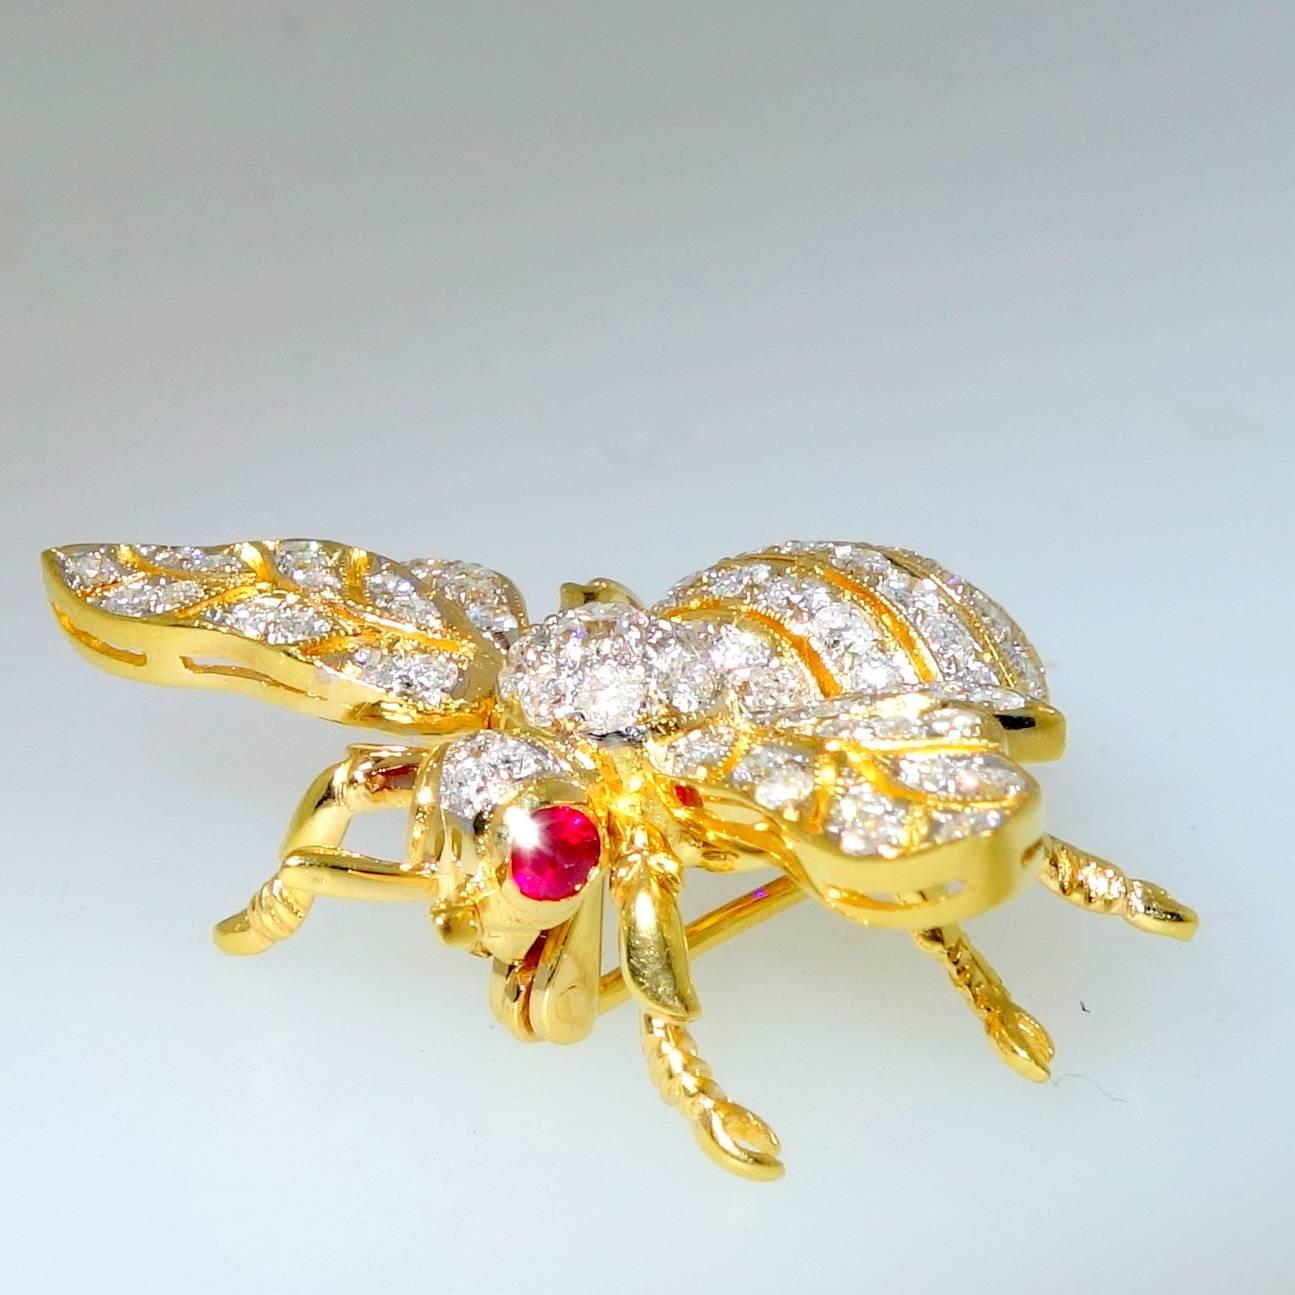 With just over 1 ct. of fine white diamonds, our little bumble bee has ruby eyes and is 18K yellow gold.  He is a nice size measuring over an inch and a quarter in diameter.